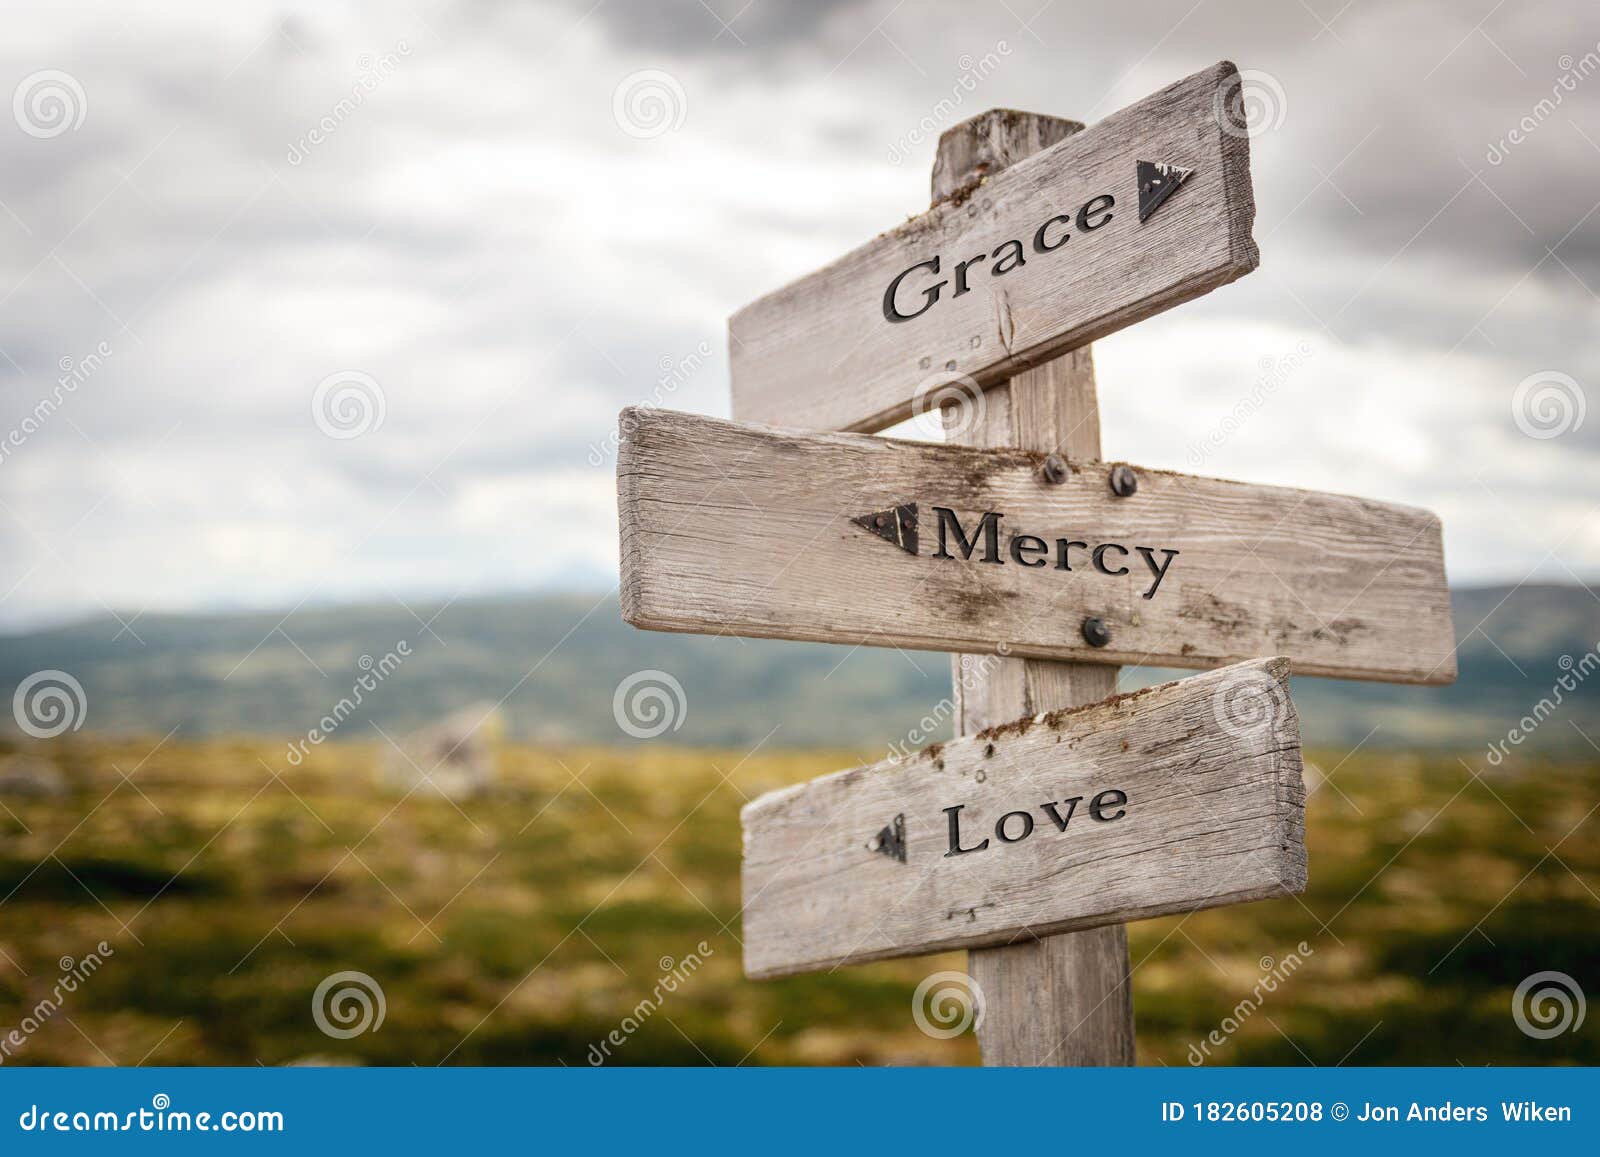 Grace Mercy Love Text on Old Wooden Signpost Outdoors in Nature Stock Photo - Image of forgive, bible: 182605208